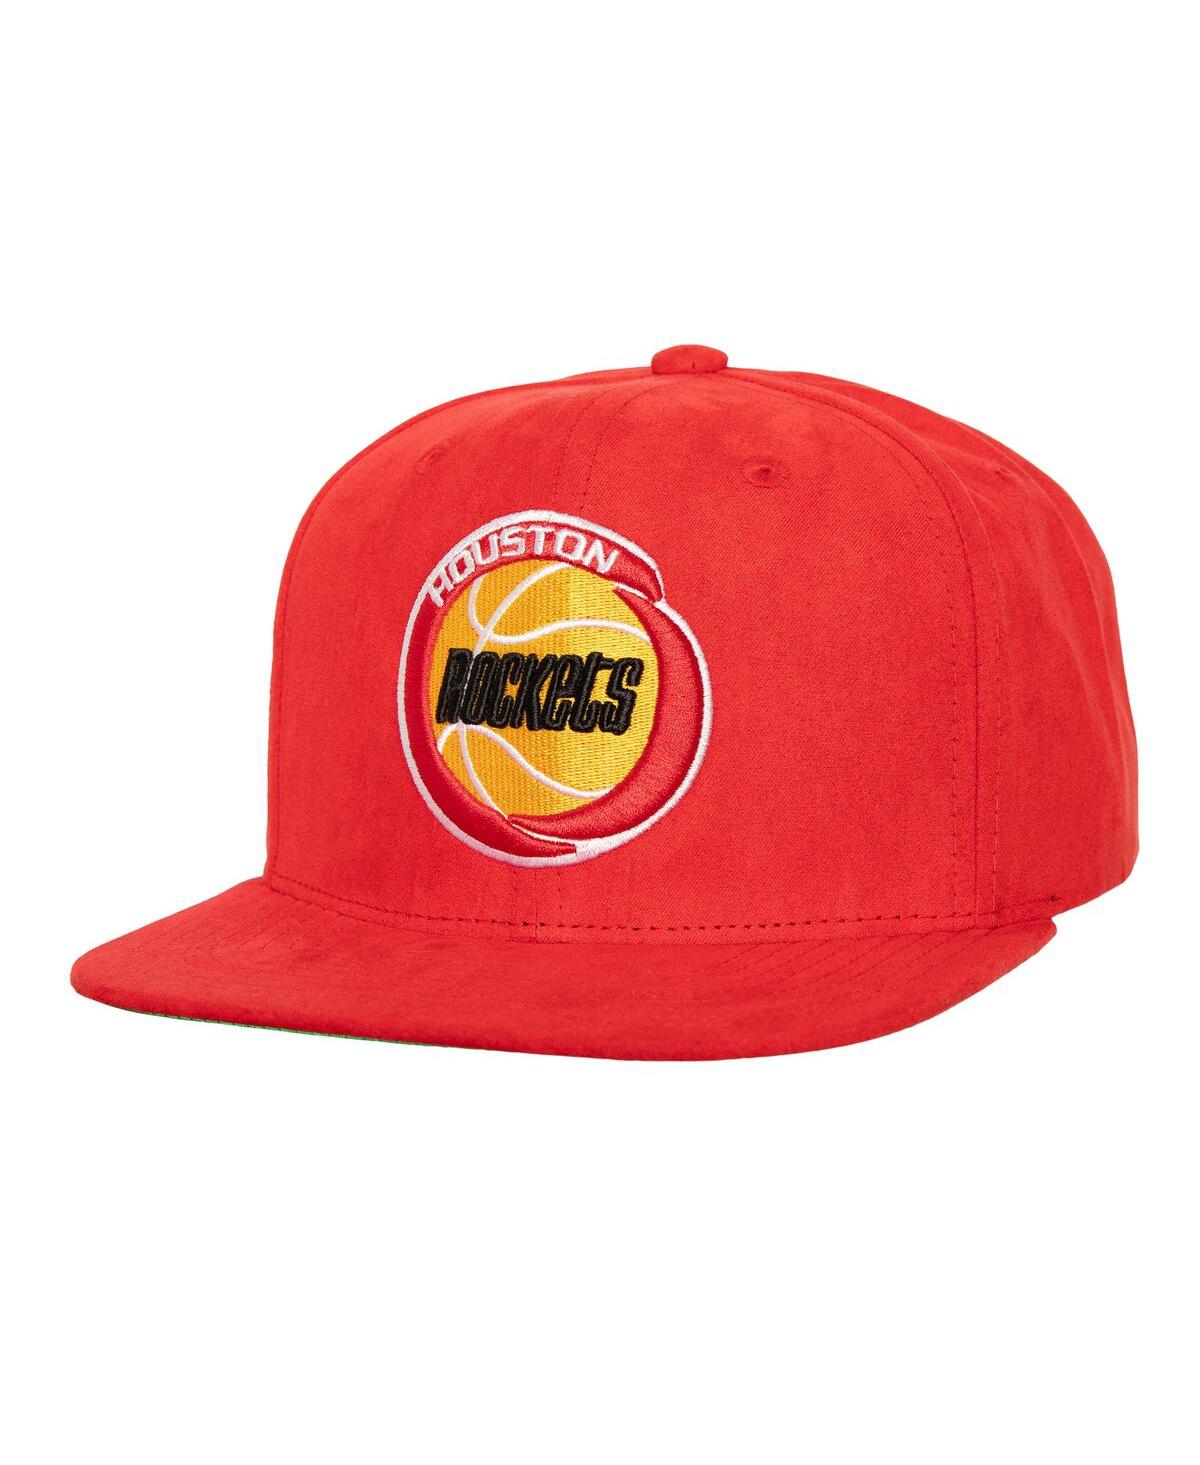 Mitchell Ness Men's Red Houston Rockets Sweet Suede Snapback Hat - Red